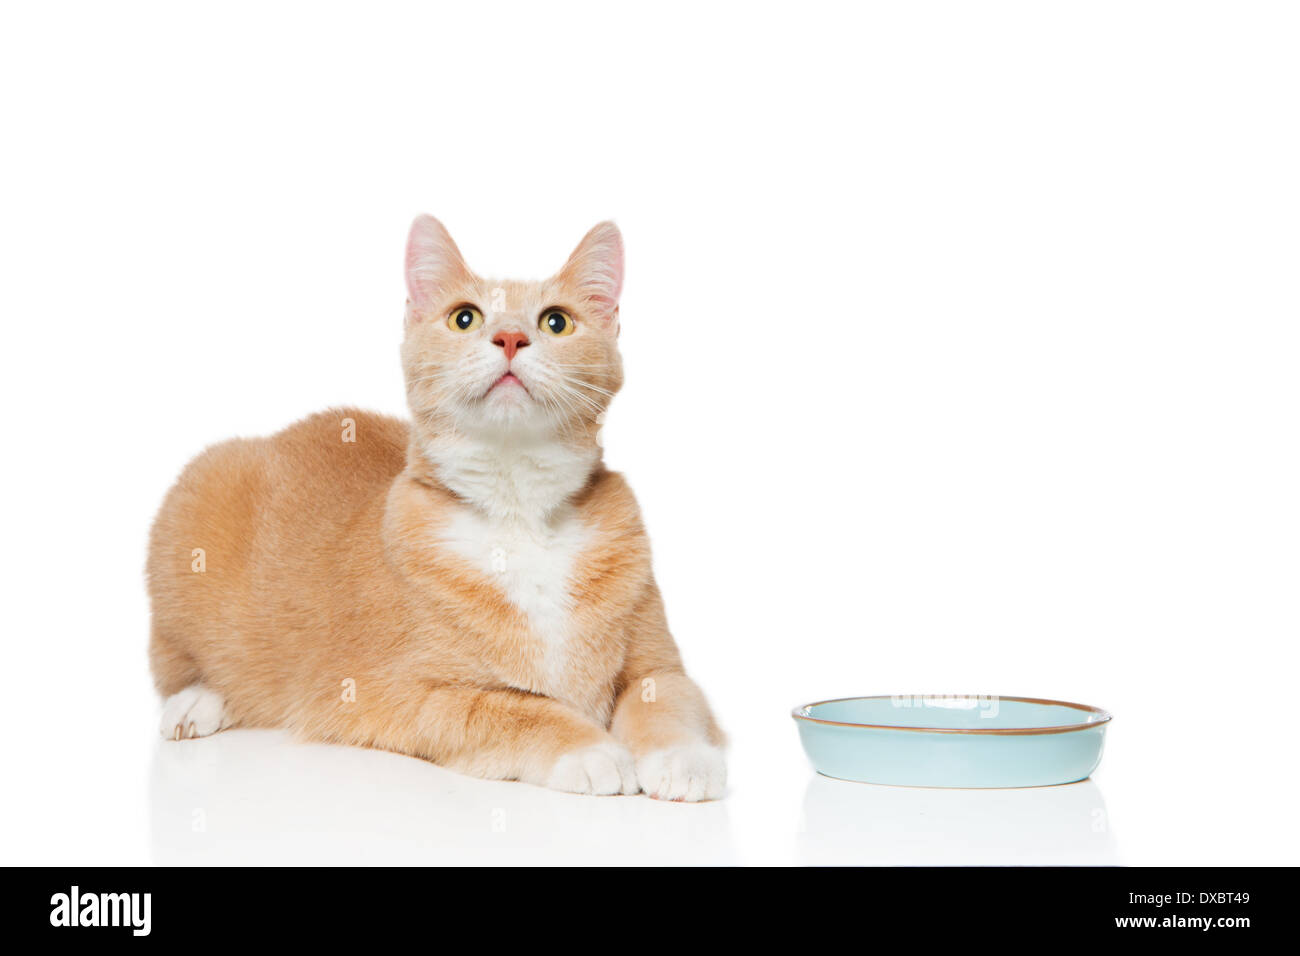 Orange cat with empty food dish looking up. Stock Photo